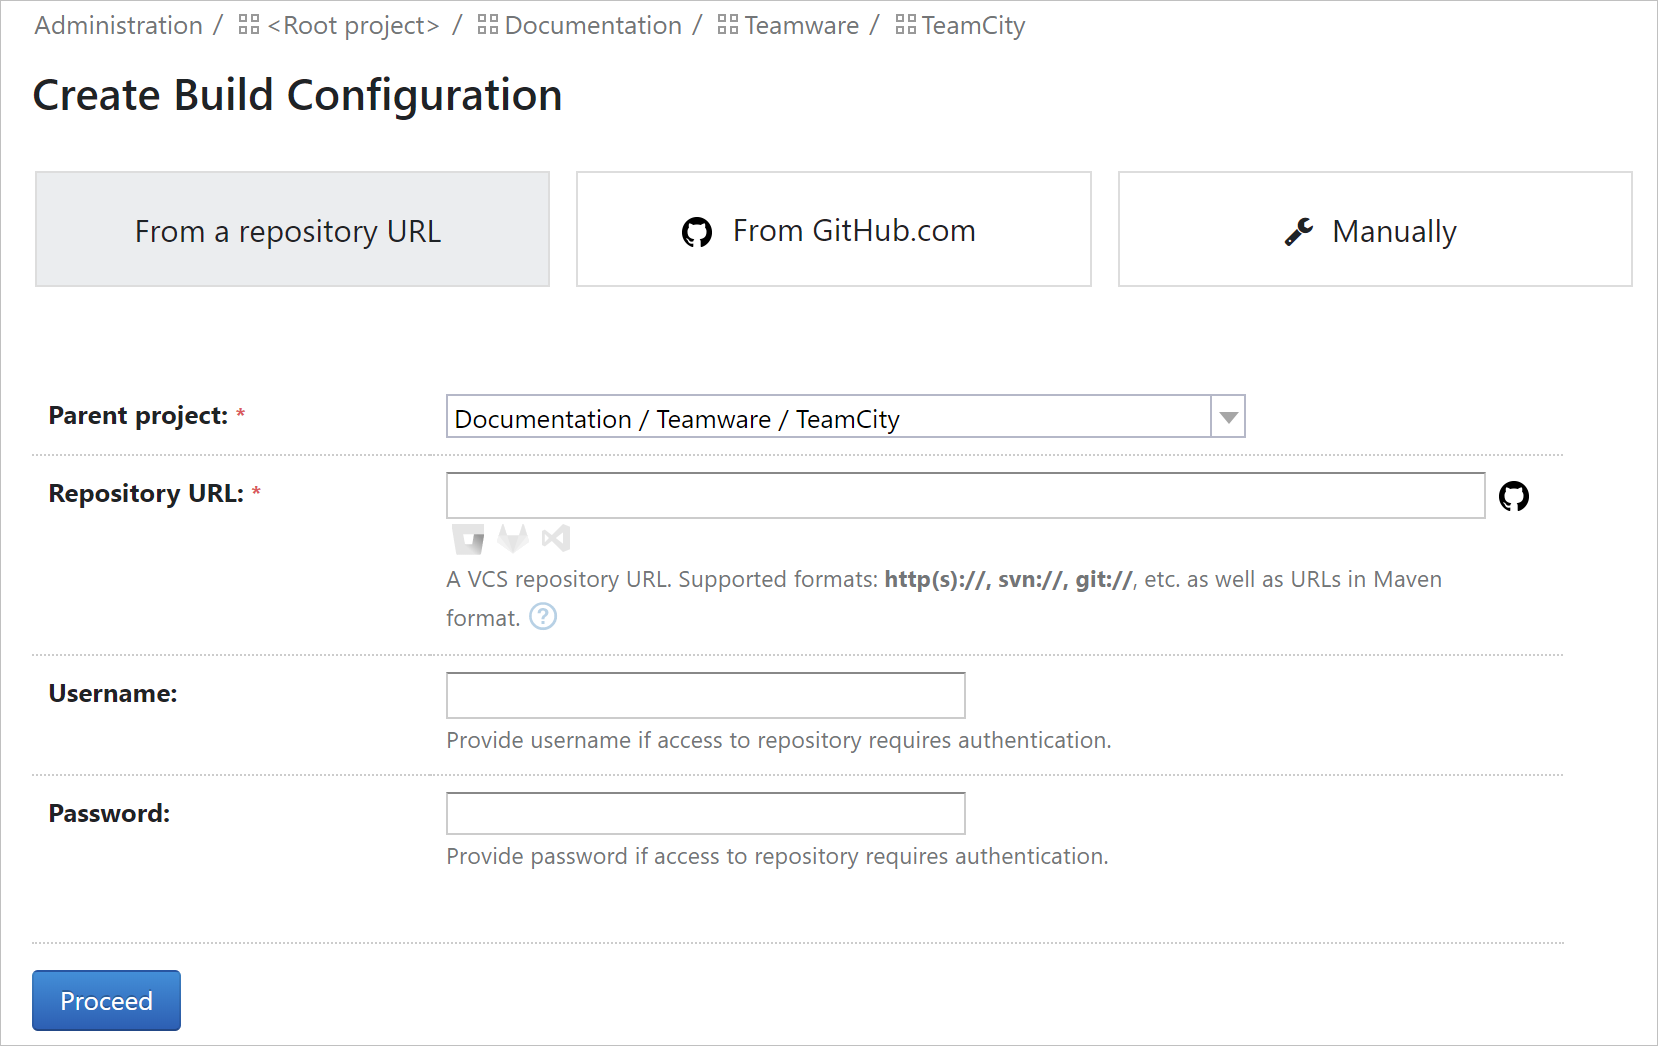 Create a build configuration from a repository URL